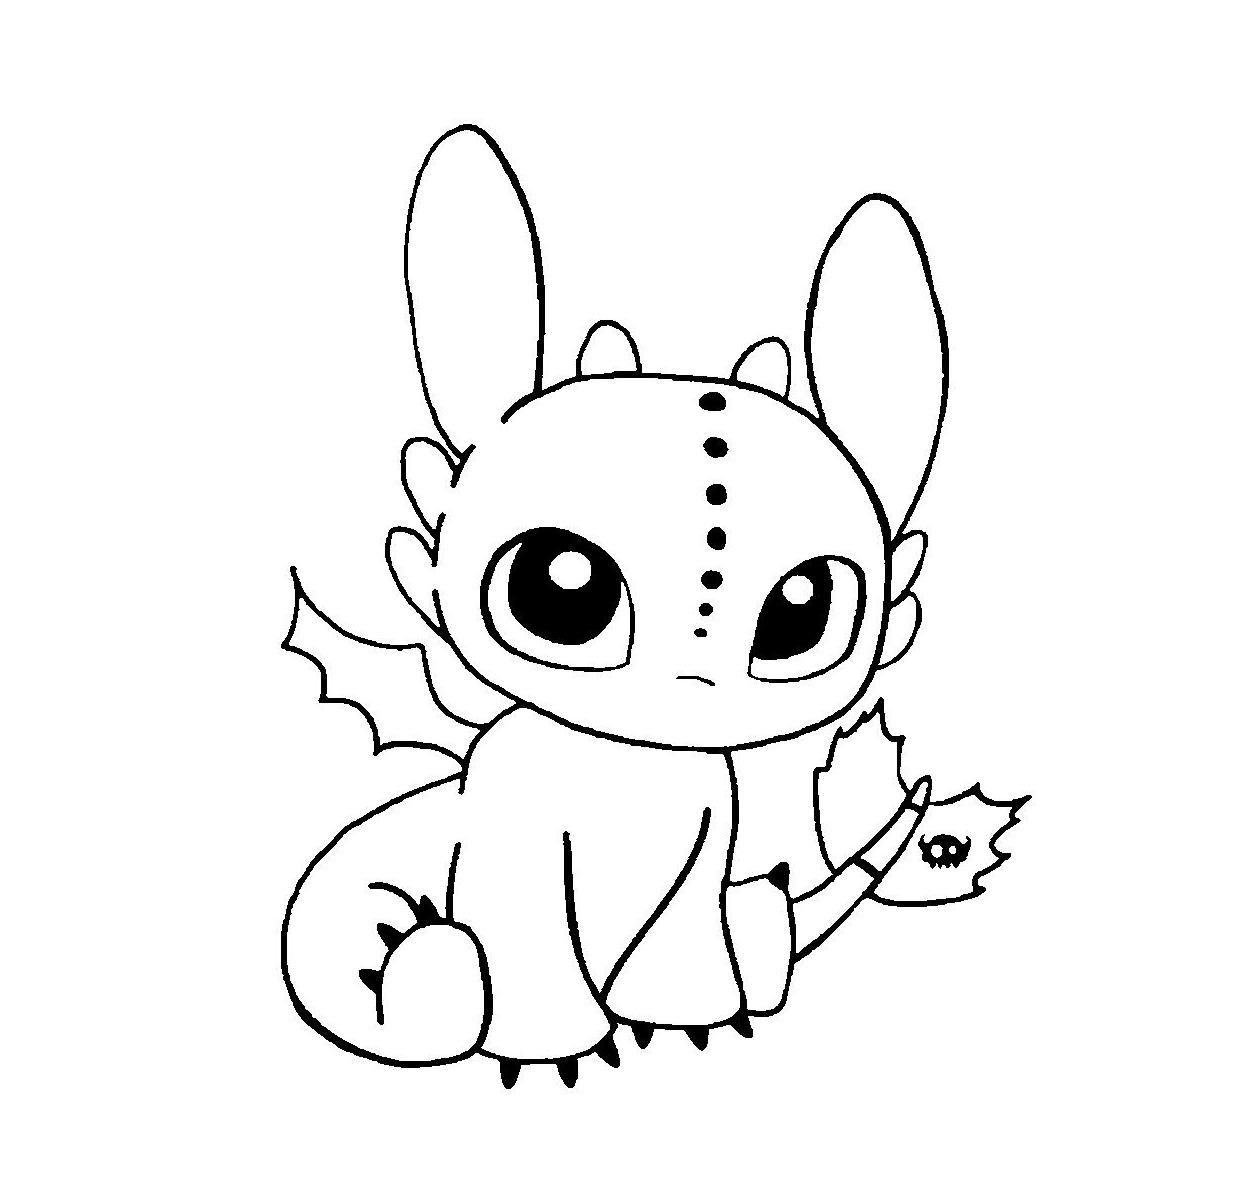 Toothless Baby Dragon coloring page, Toothless coloring pages, Cute